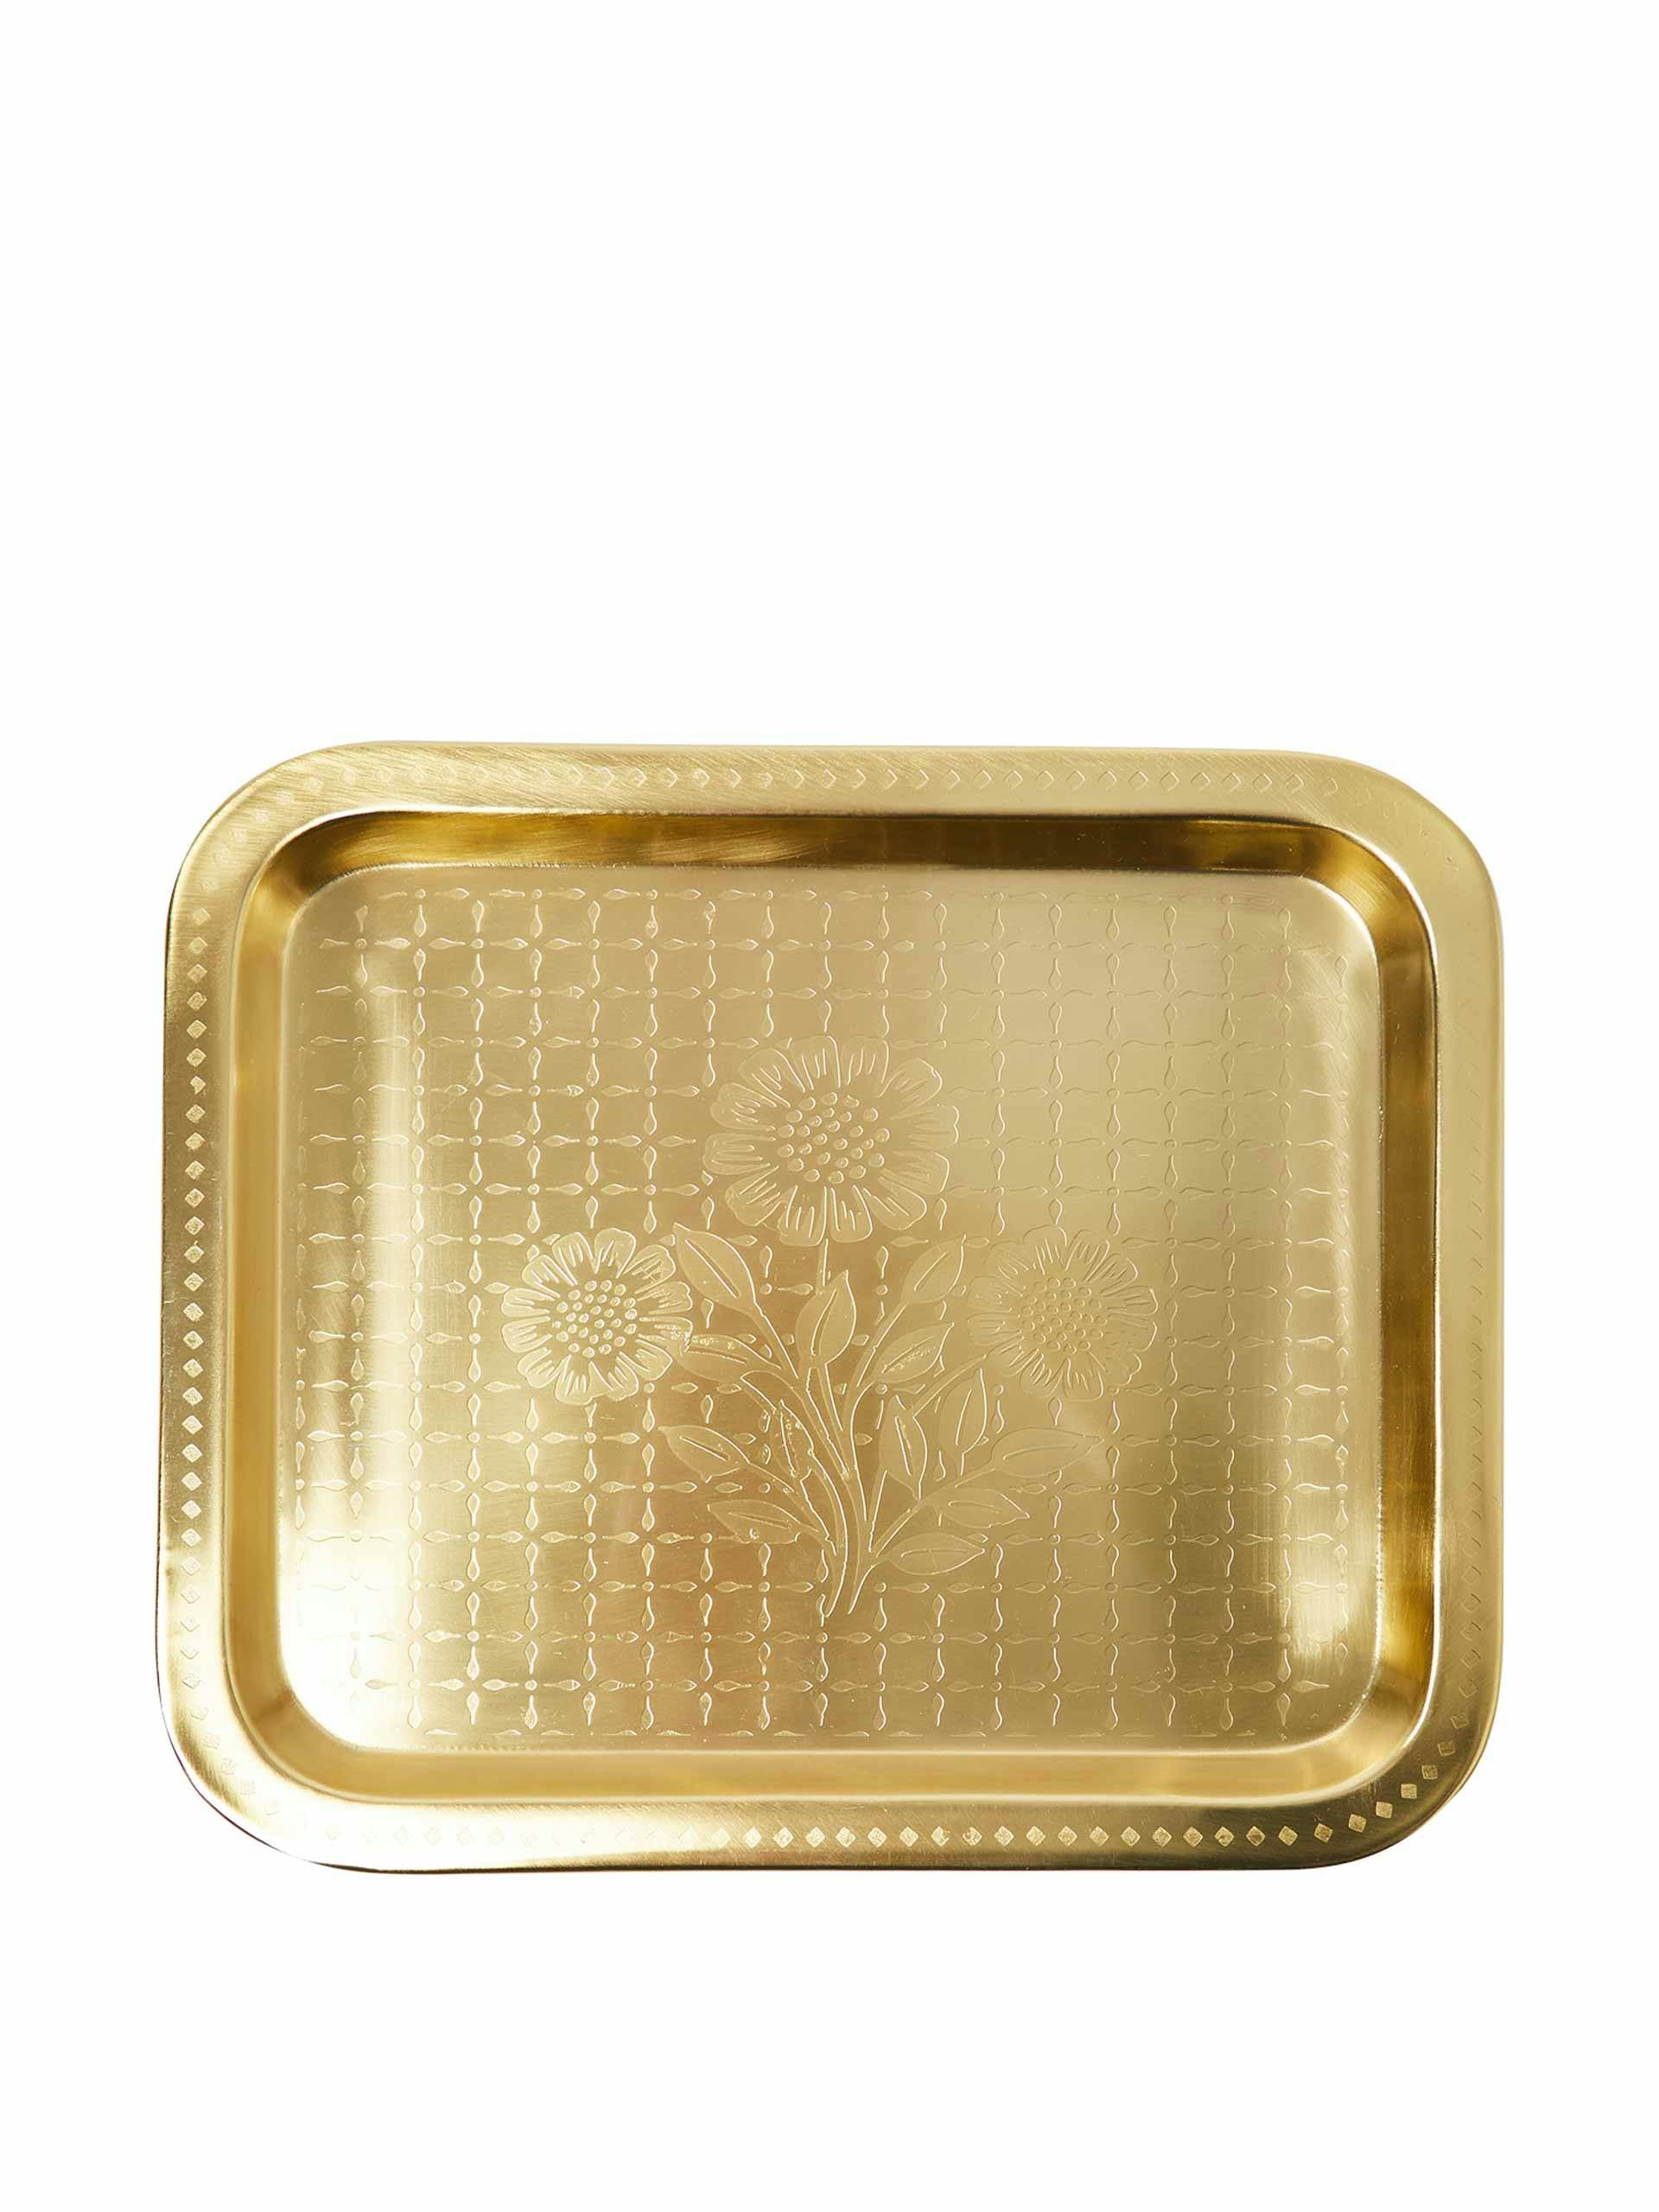 Gold metal tray with etched flowers